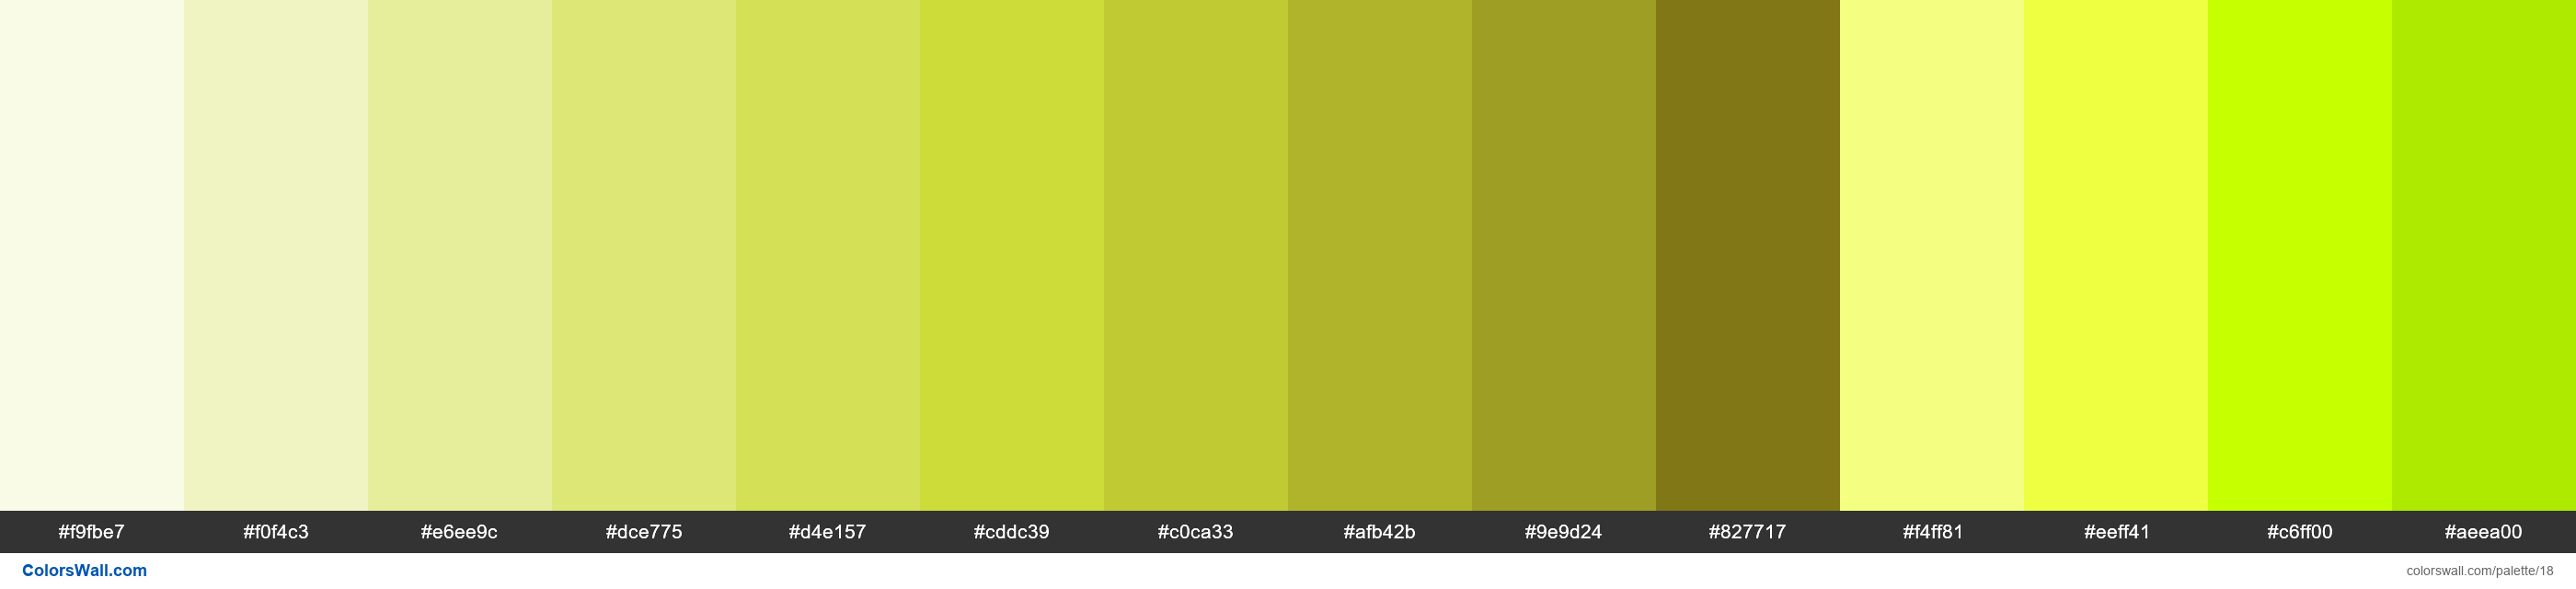 Lime palette Materialize CSS - #18